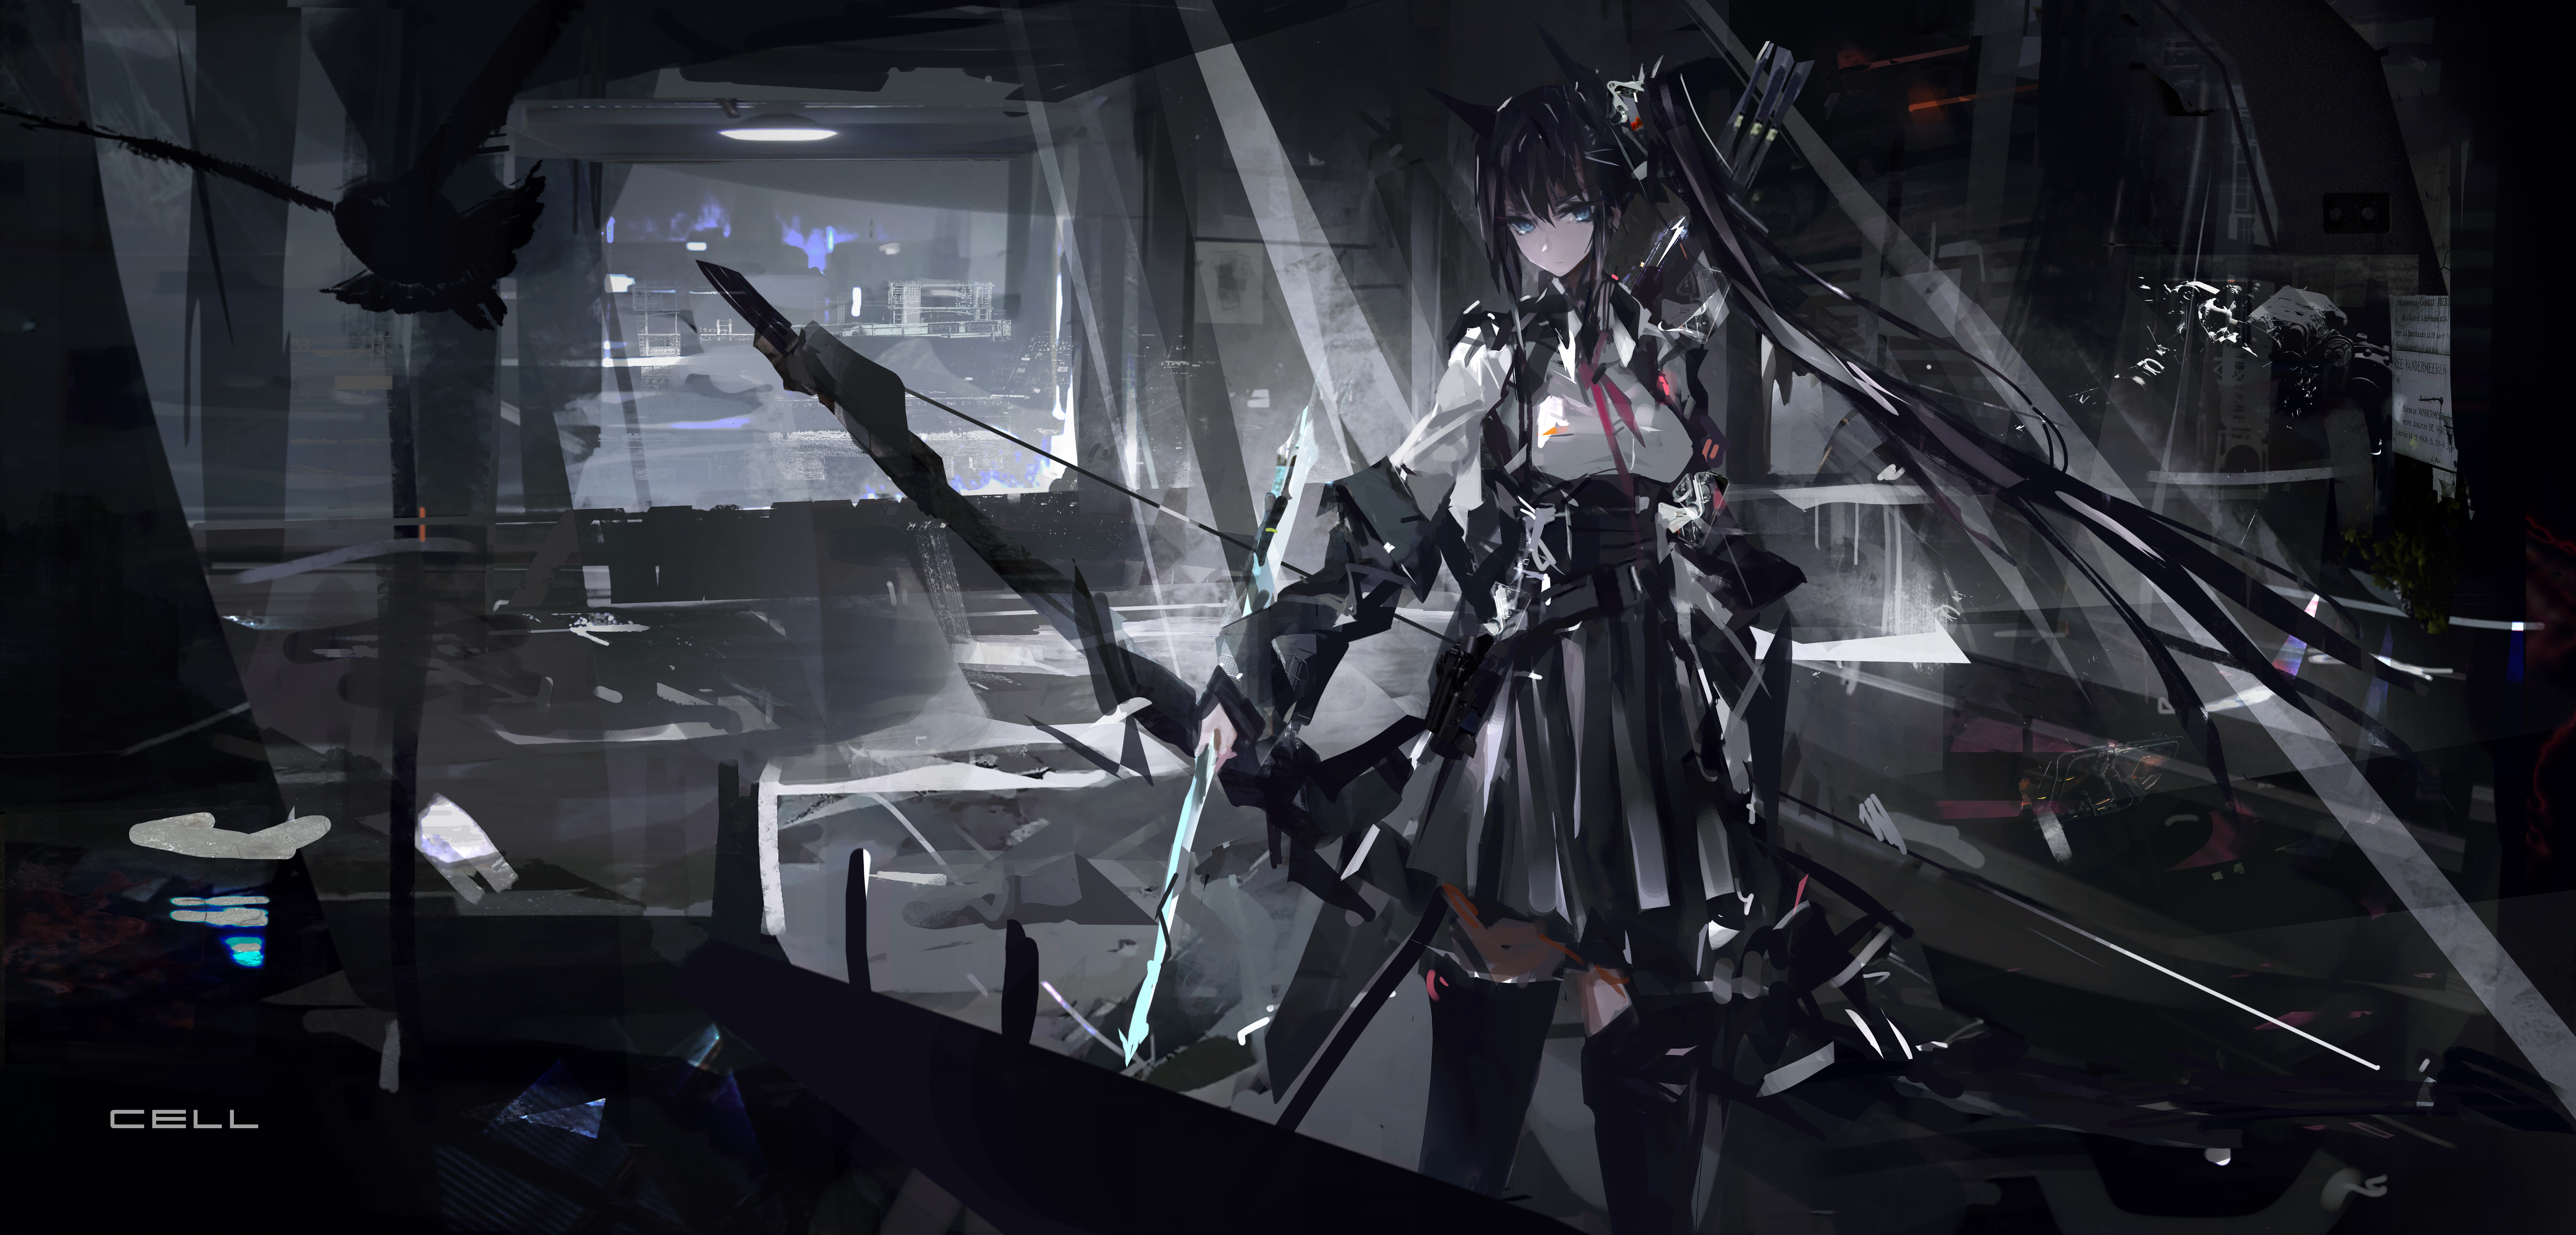 Cell Artist Anime Anime Girls Girl With Weapon Science Fiction 7094x3400